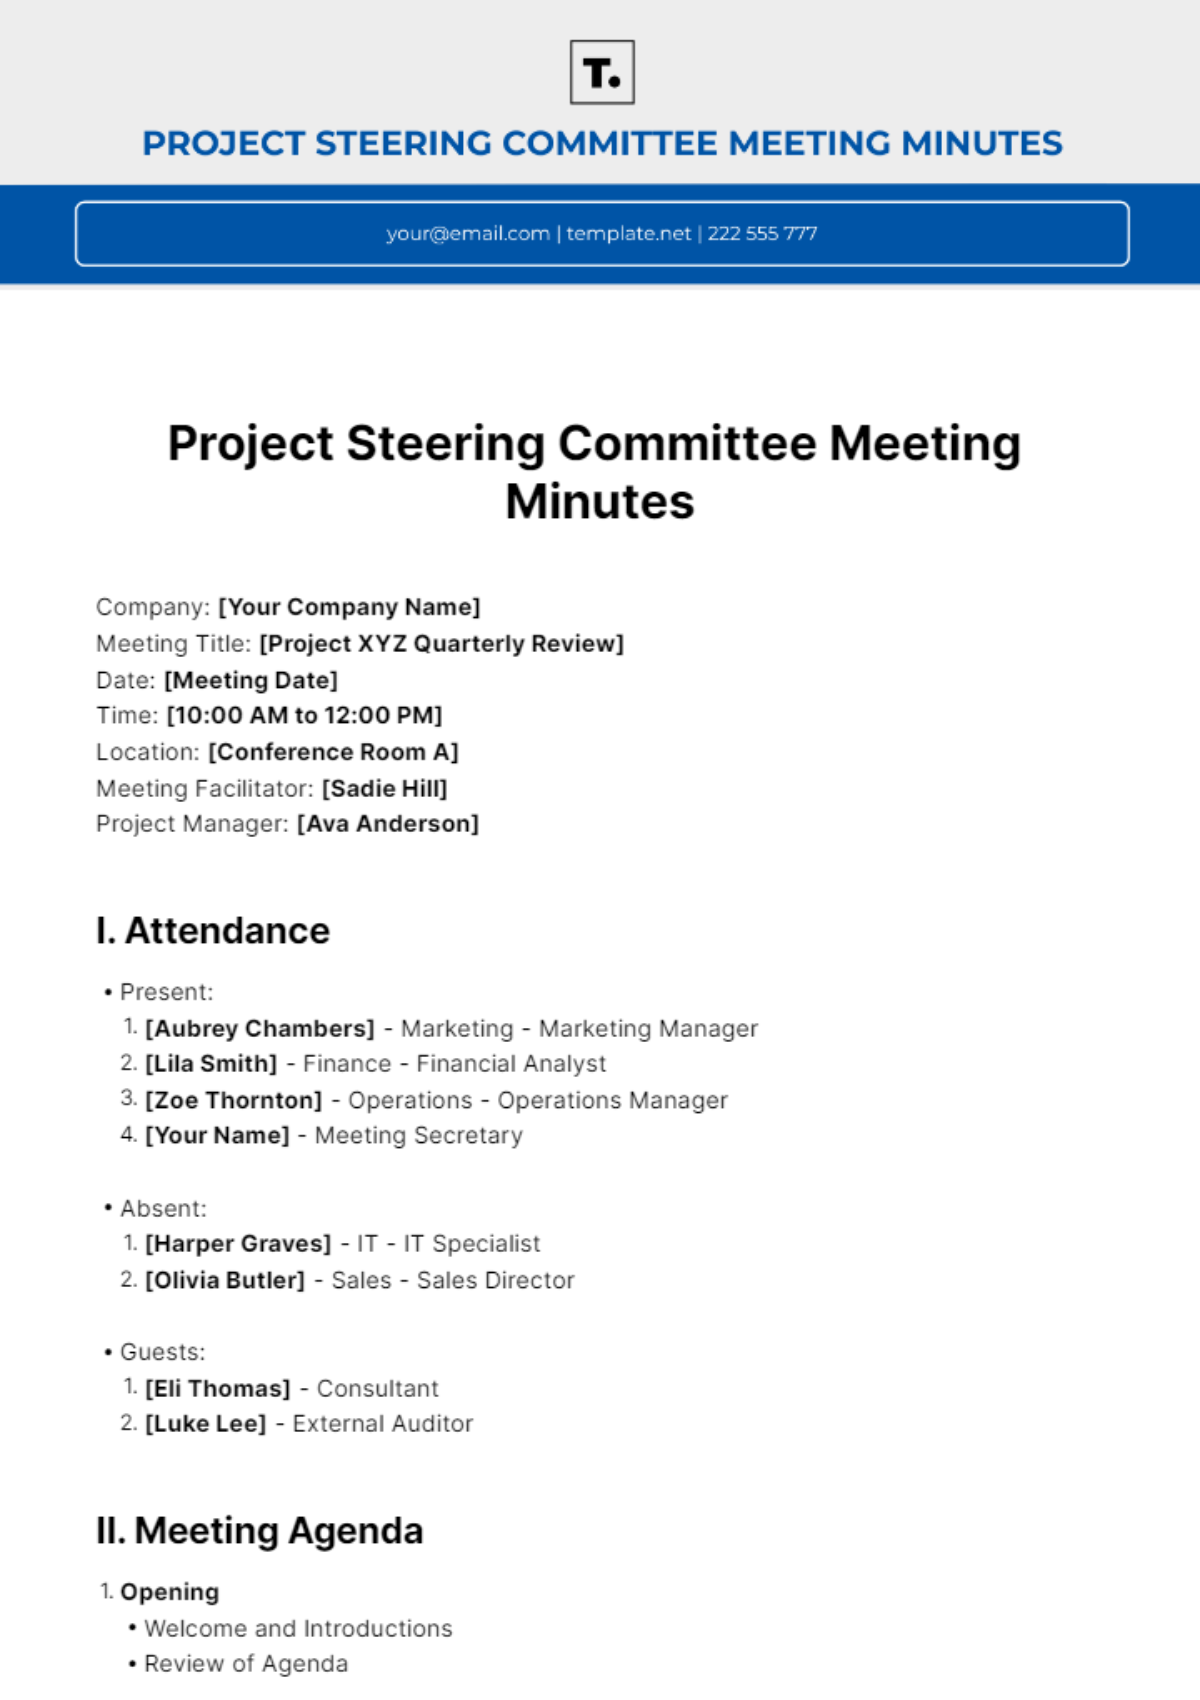 Project Steering Committee Meeting Minutes Template